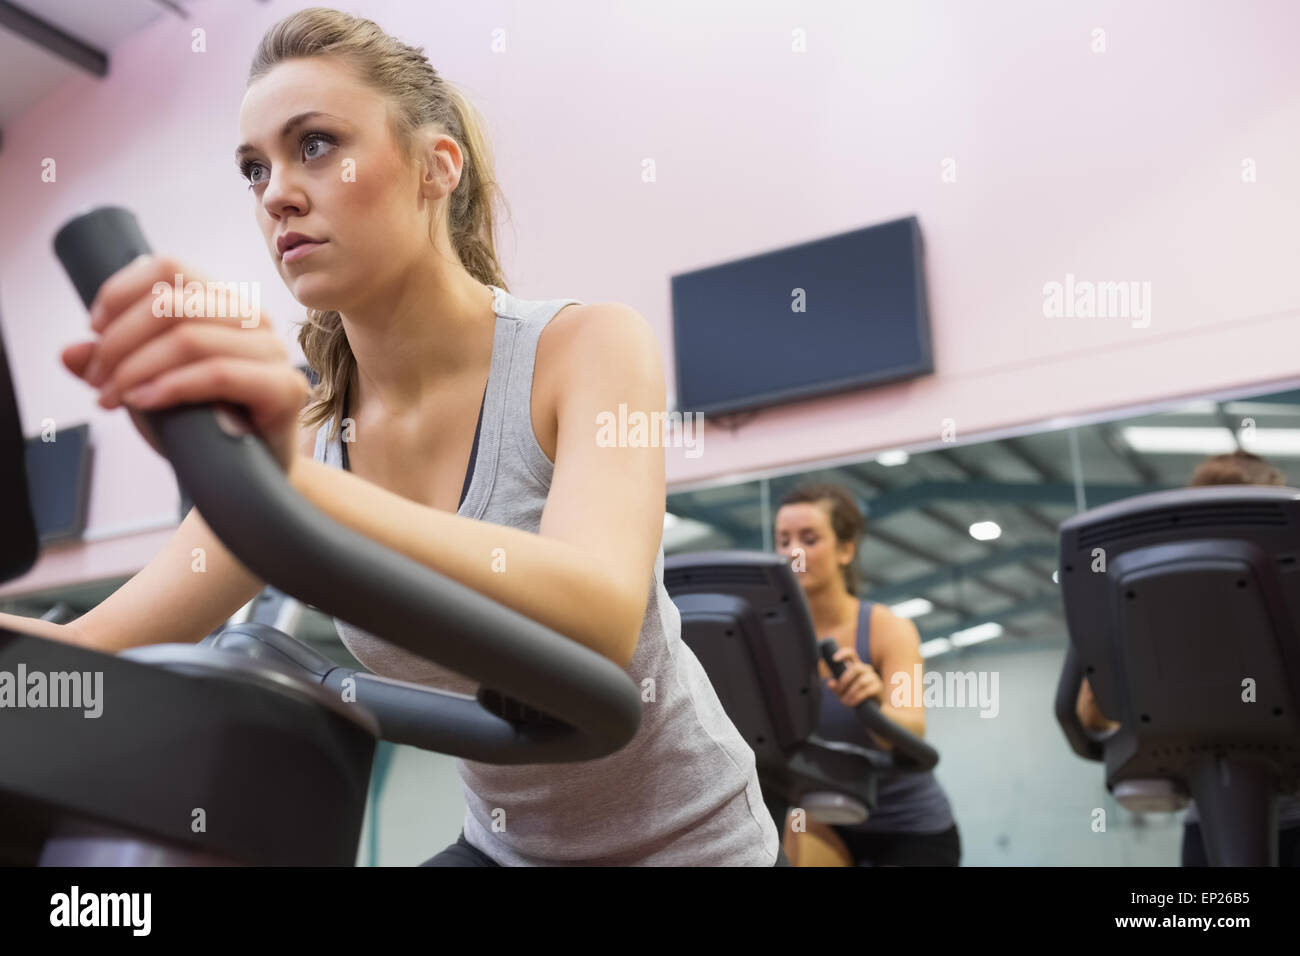 Woman training on exercise bike in a spinning class Stock Photo